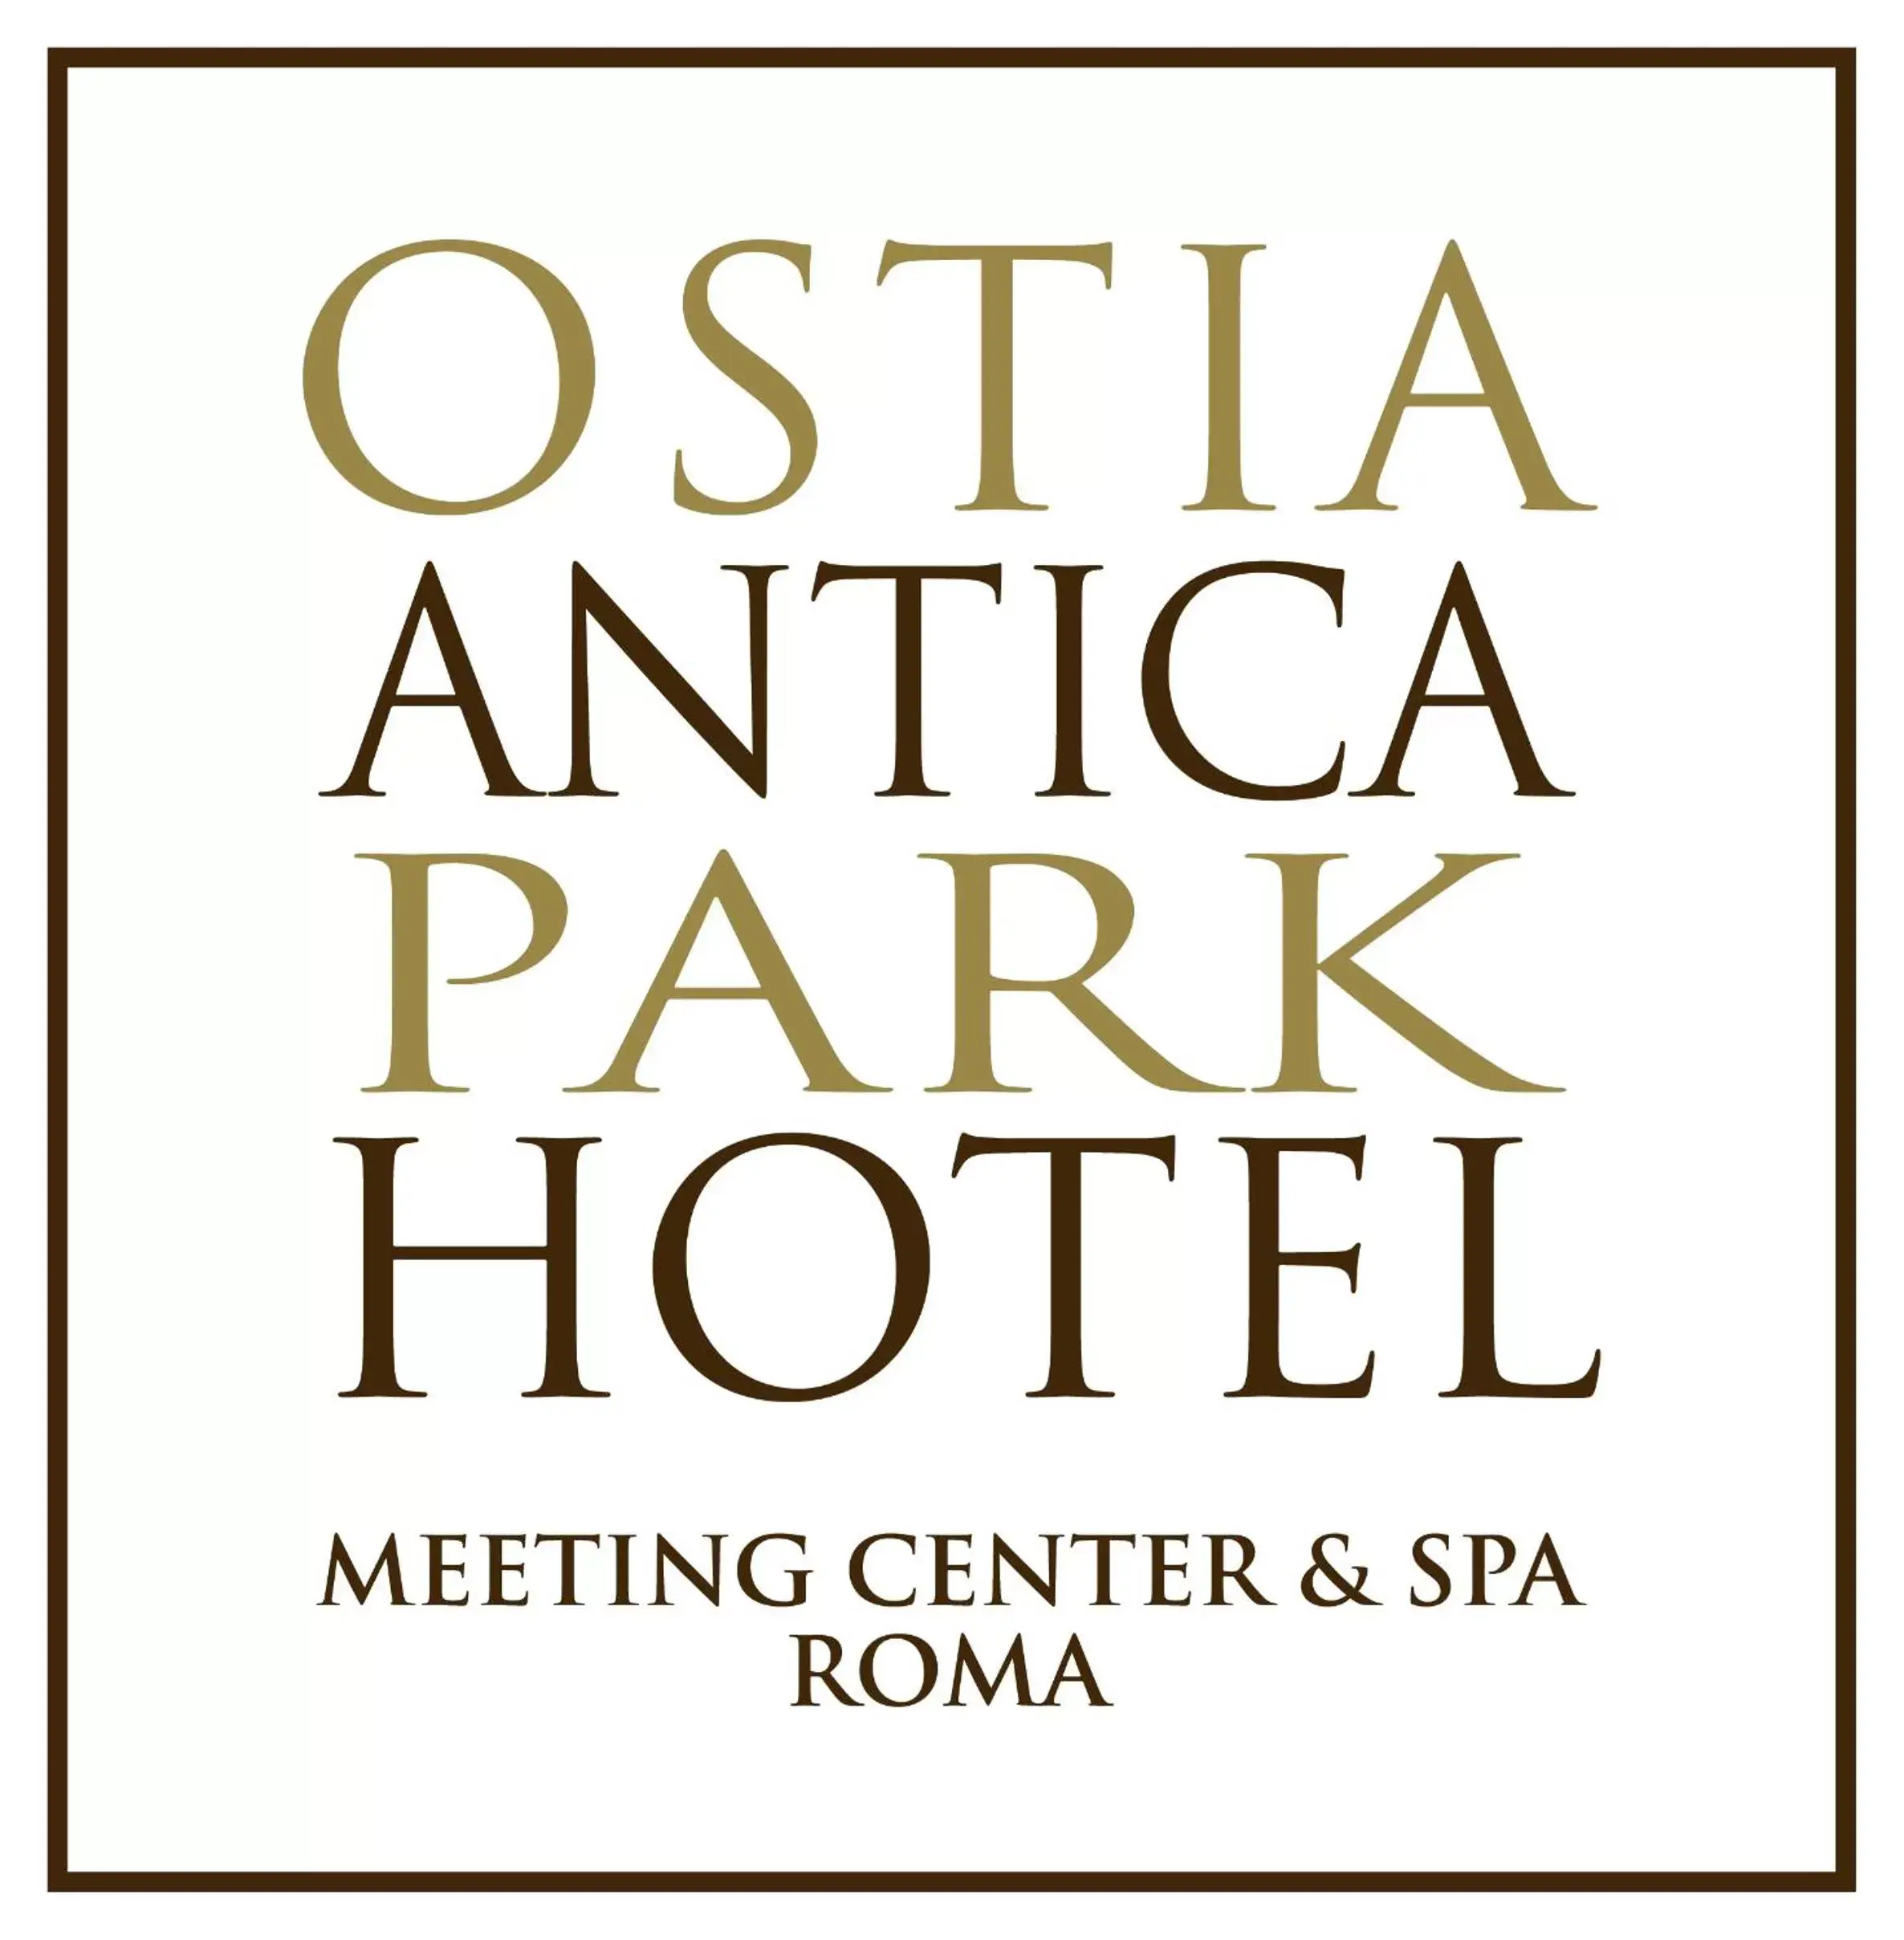 Property logo or sign in Ostia Antica Park Hotel & Spa